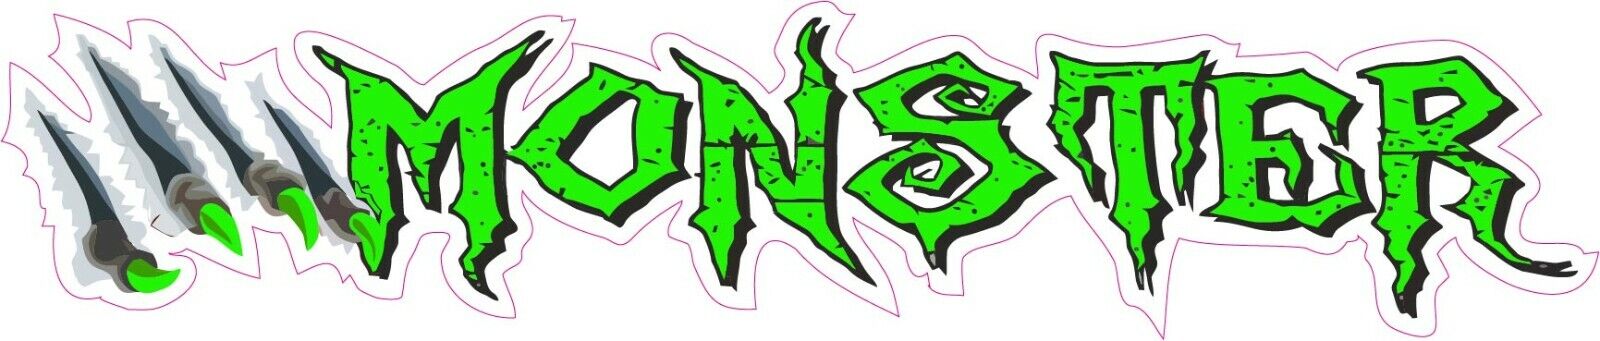 Monster Claws Green Large Decal 12